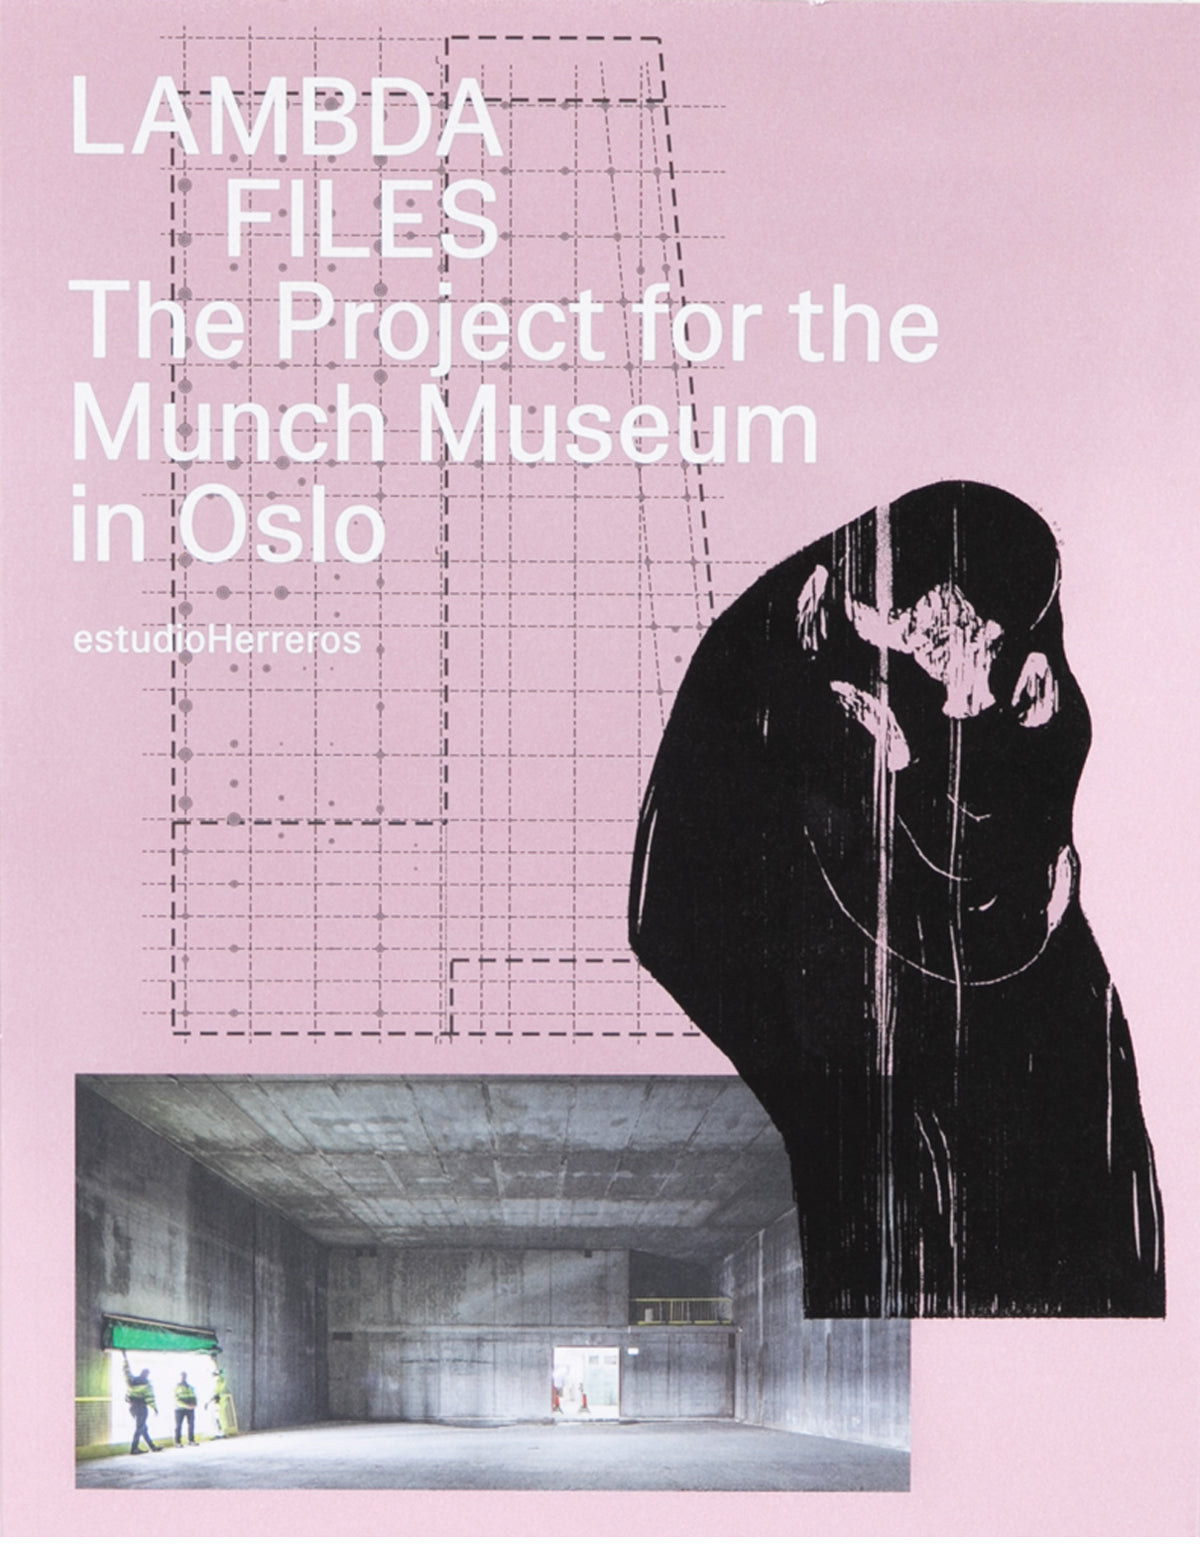 Lambda Files: The Project for the Munch Museum in Oslo